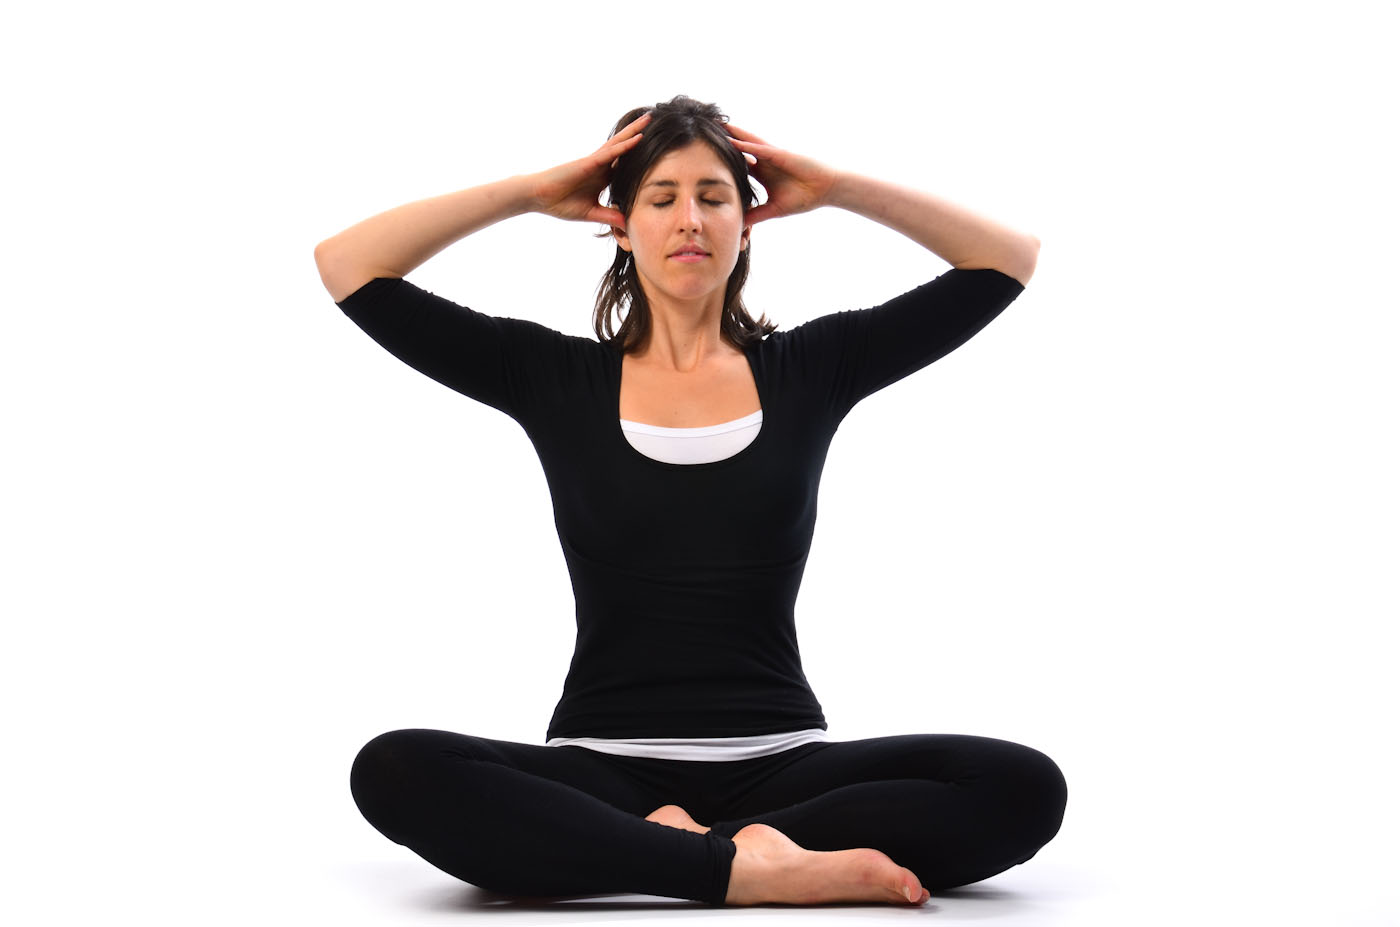 Breathing Exercises to Do Before Any Physical Activity - Understand the Benefits